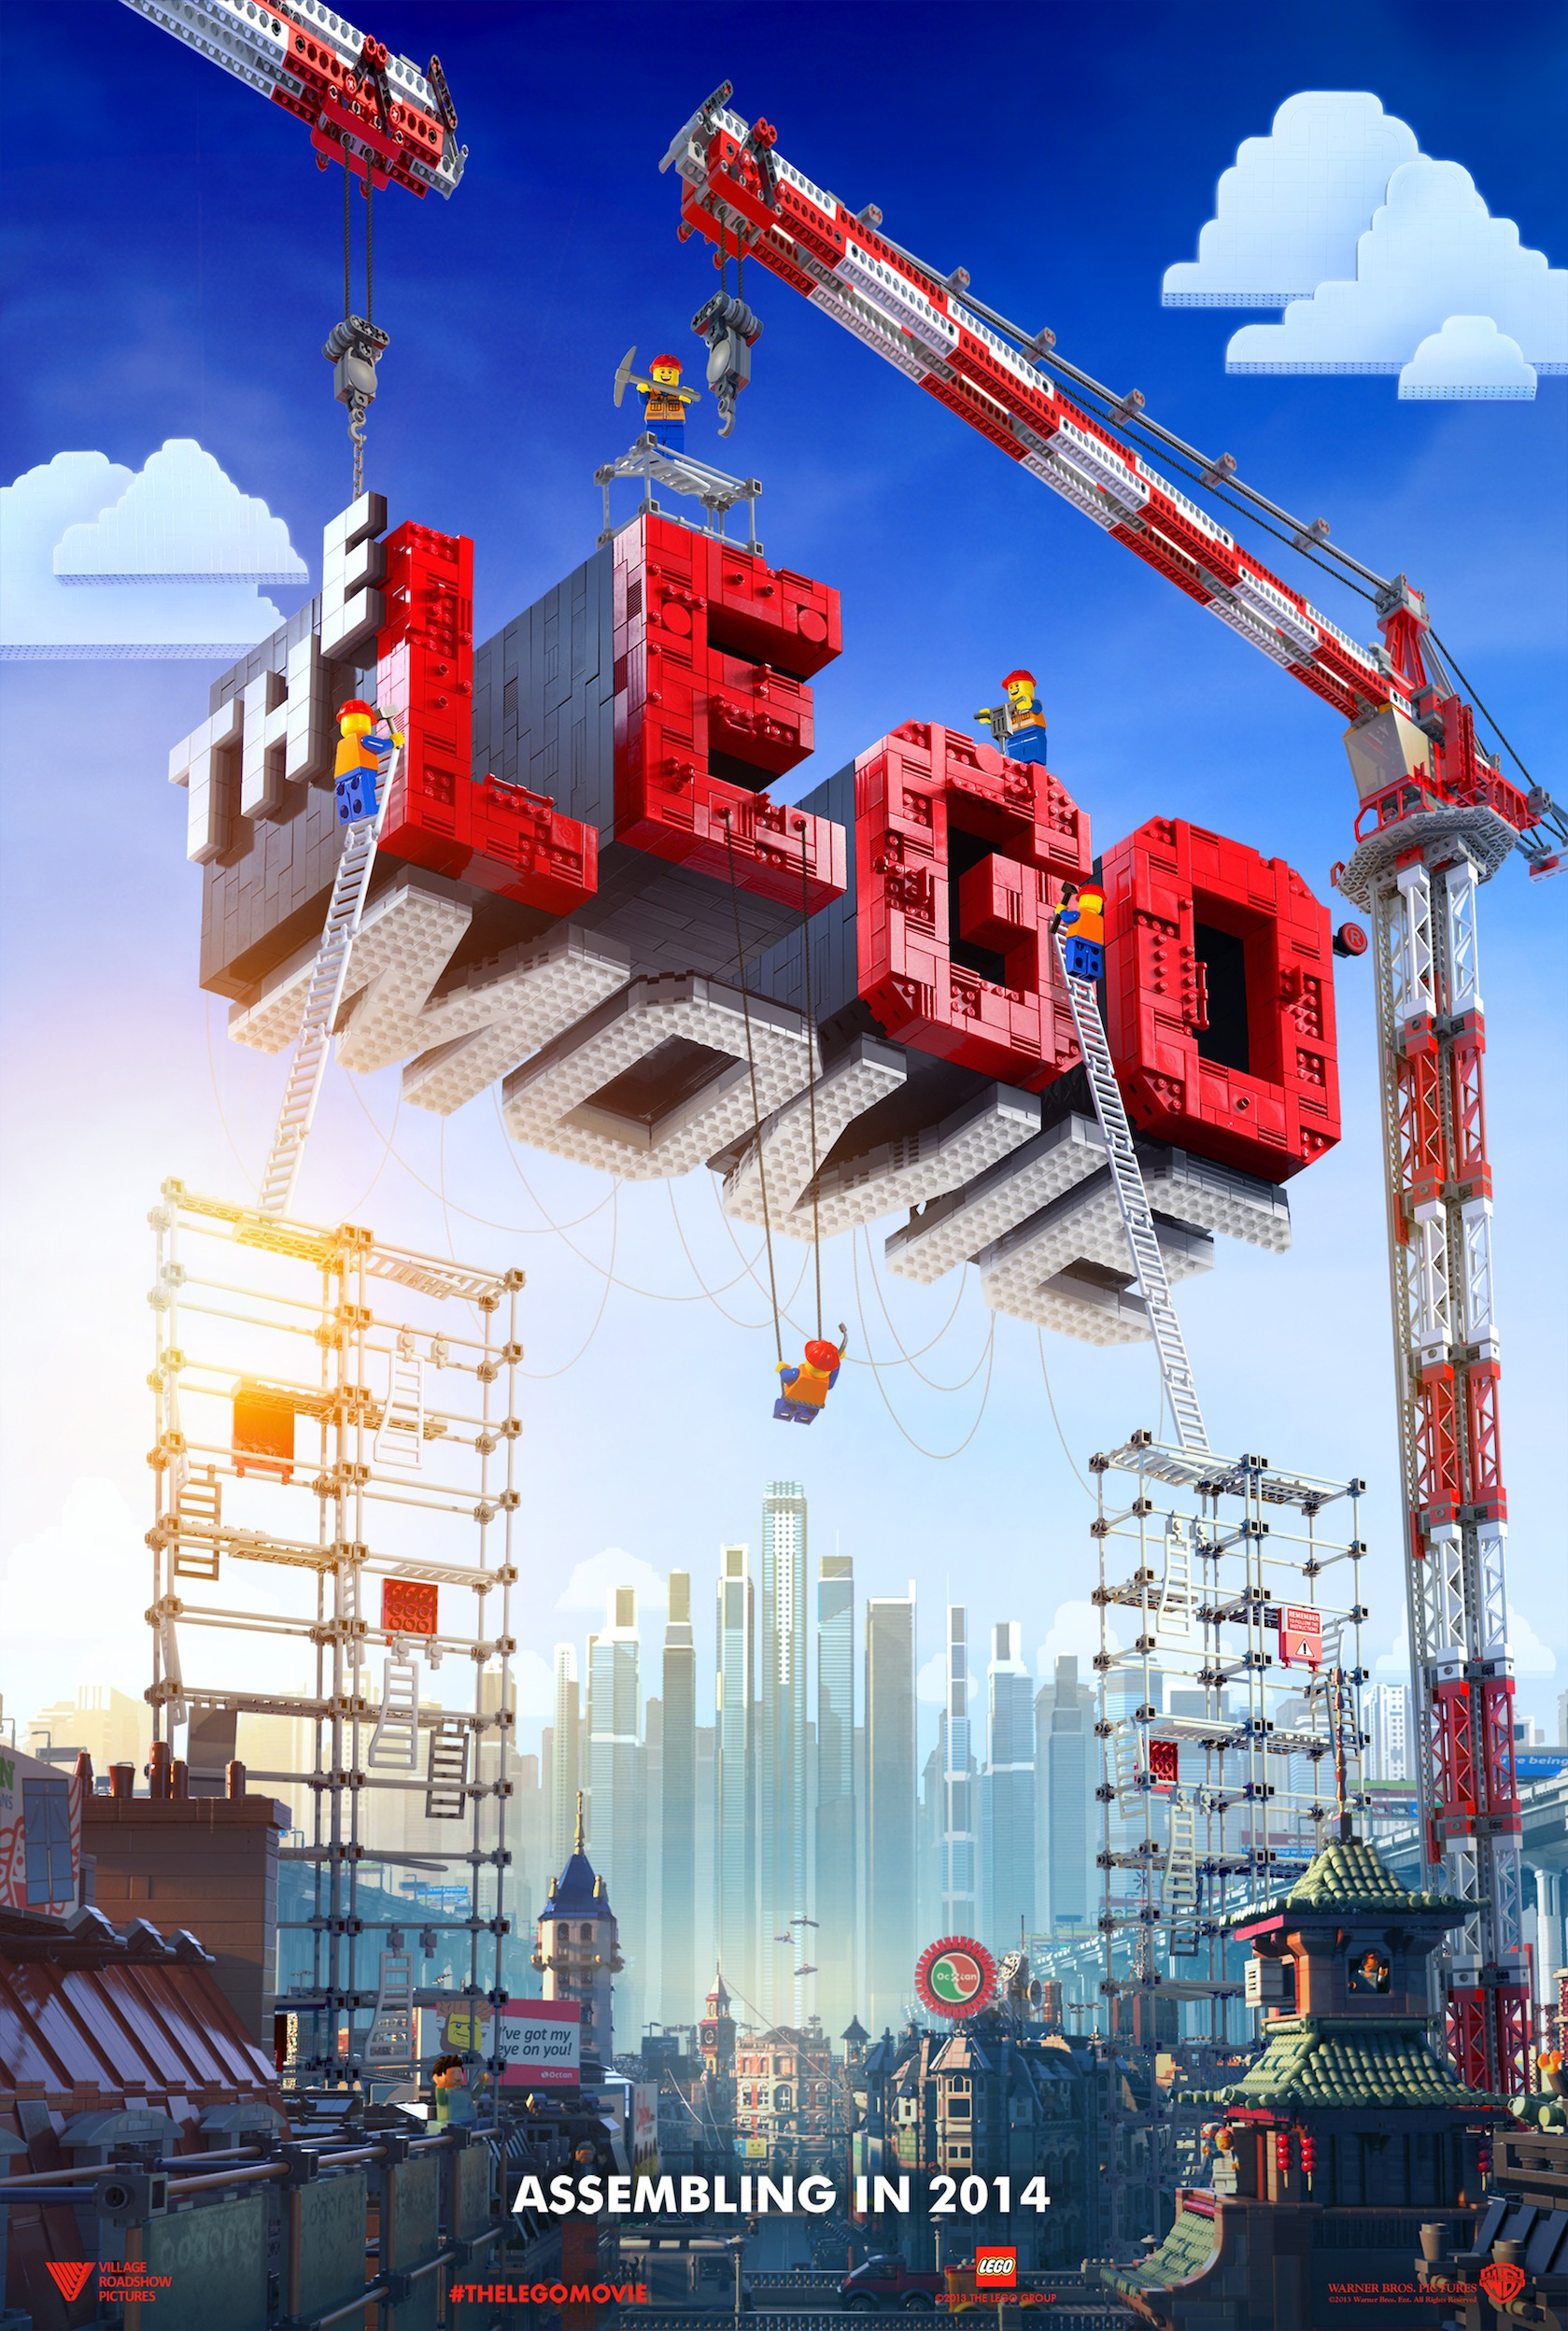 Poster for "The Lego Movie"